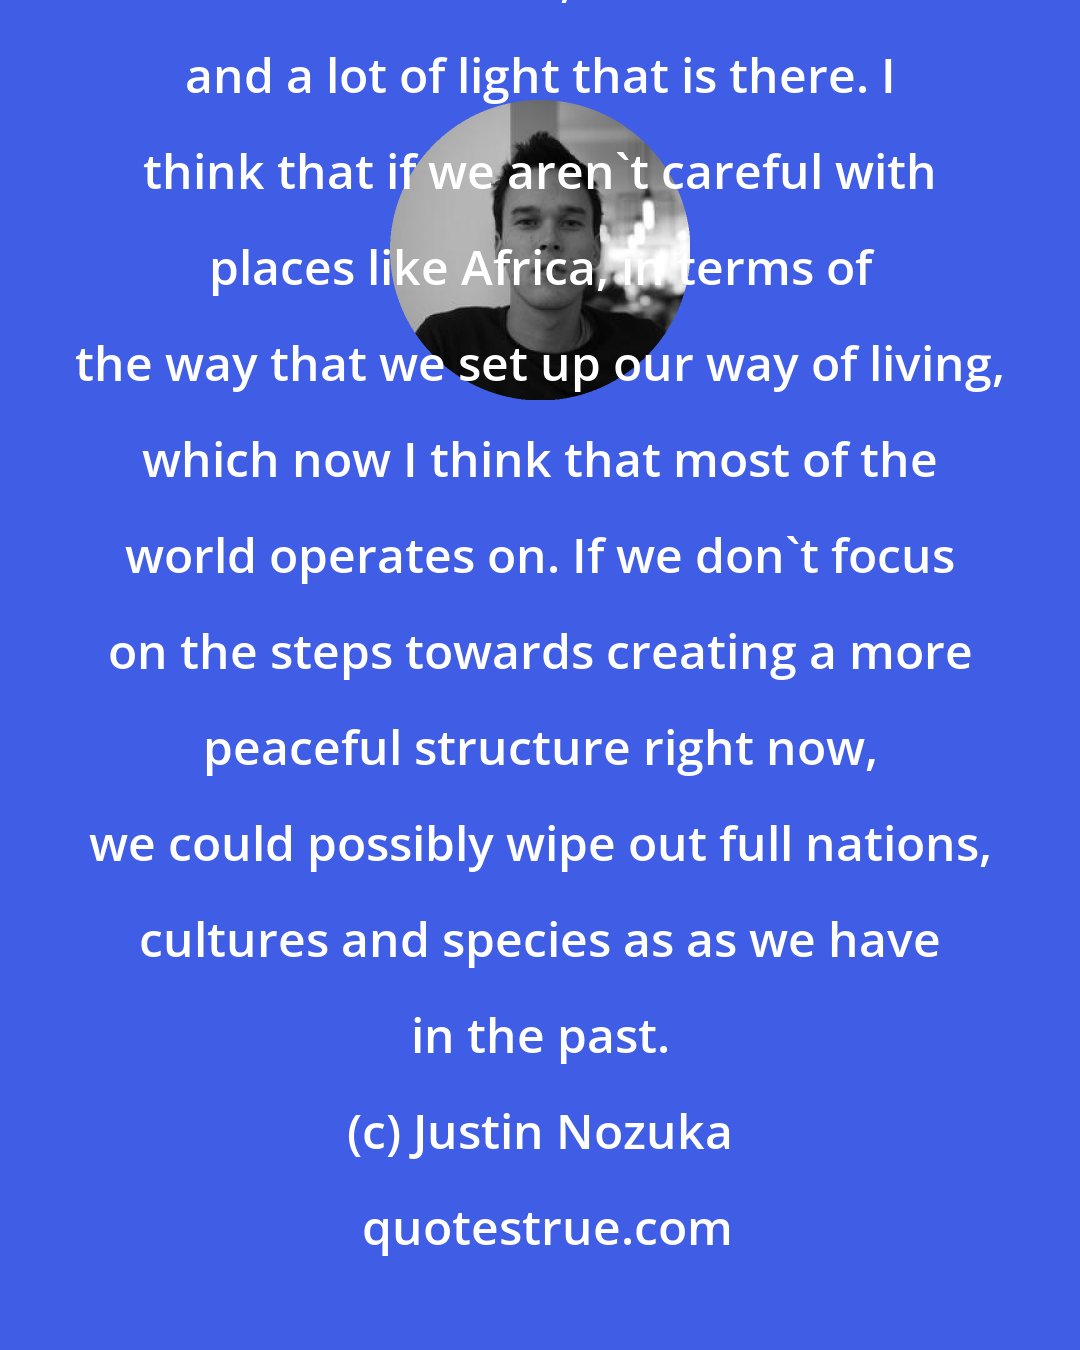 Justin Nozuka: Africa is a very special place, the people are very special there. There is a lot of love, and a lot warmth and a lot of light that is there. I think that if we aren't careful with places like Africa, in terms of the way that we set up our way of living, which now I think that most of the world operates on. If we don't focus on the steps towards creating a more peaceful structure right now, we could possibly wipe out full nations, cultures and species as as we have in the past.